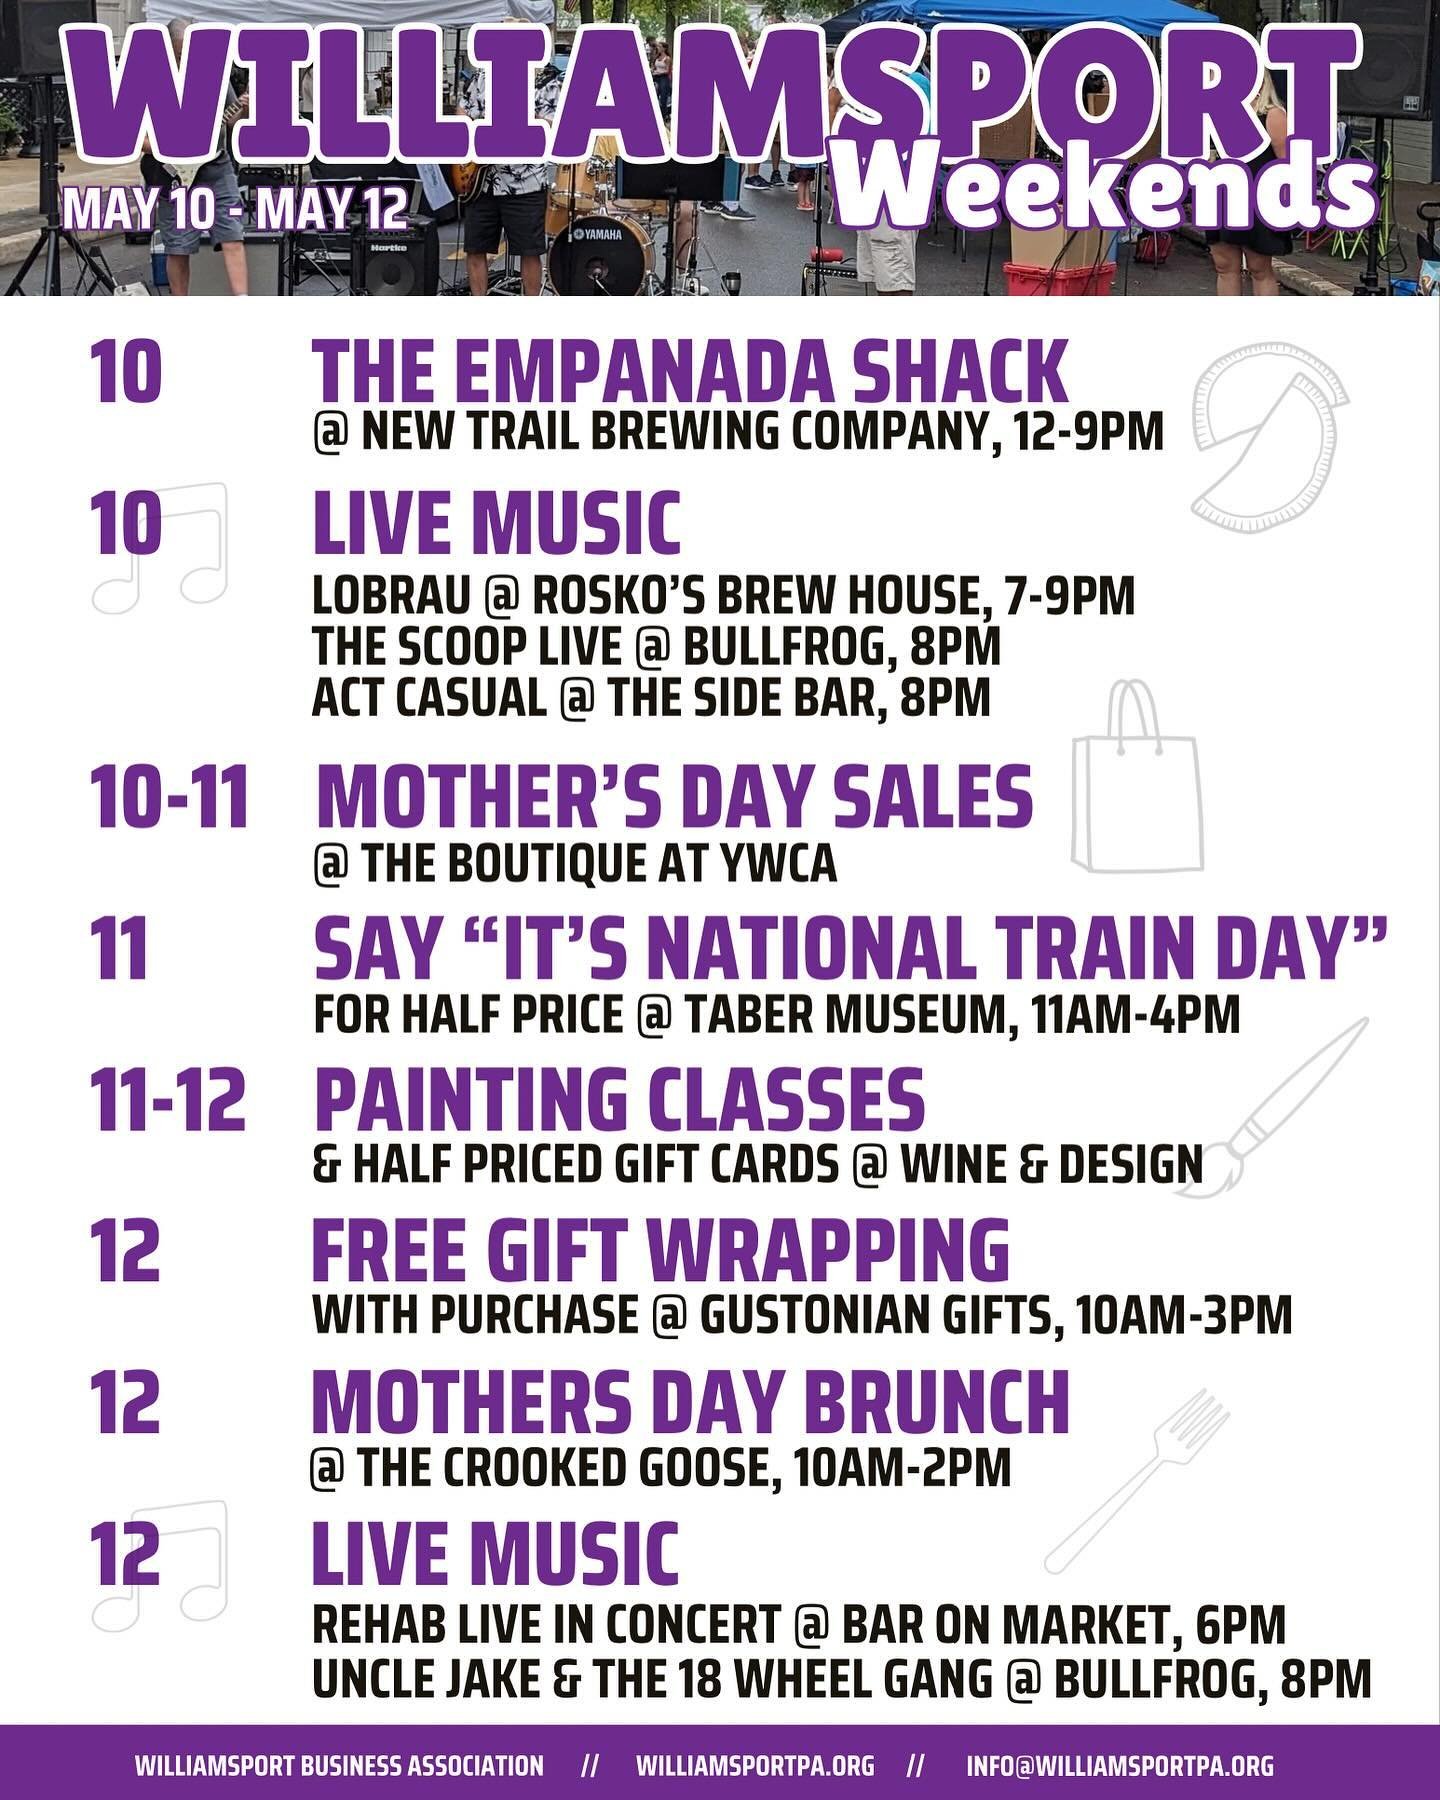 What you have been waiting for 👇Although you won&rsquo;t melt in the rain, there are plenty of indoor activities this weekend to take advantage of. 👍

1️⃣0️⃣ FRIDAY
The Empanada Shack at New Trail Brewing Company , 12-9pm
Live Music at Rosko&rsquo;